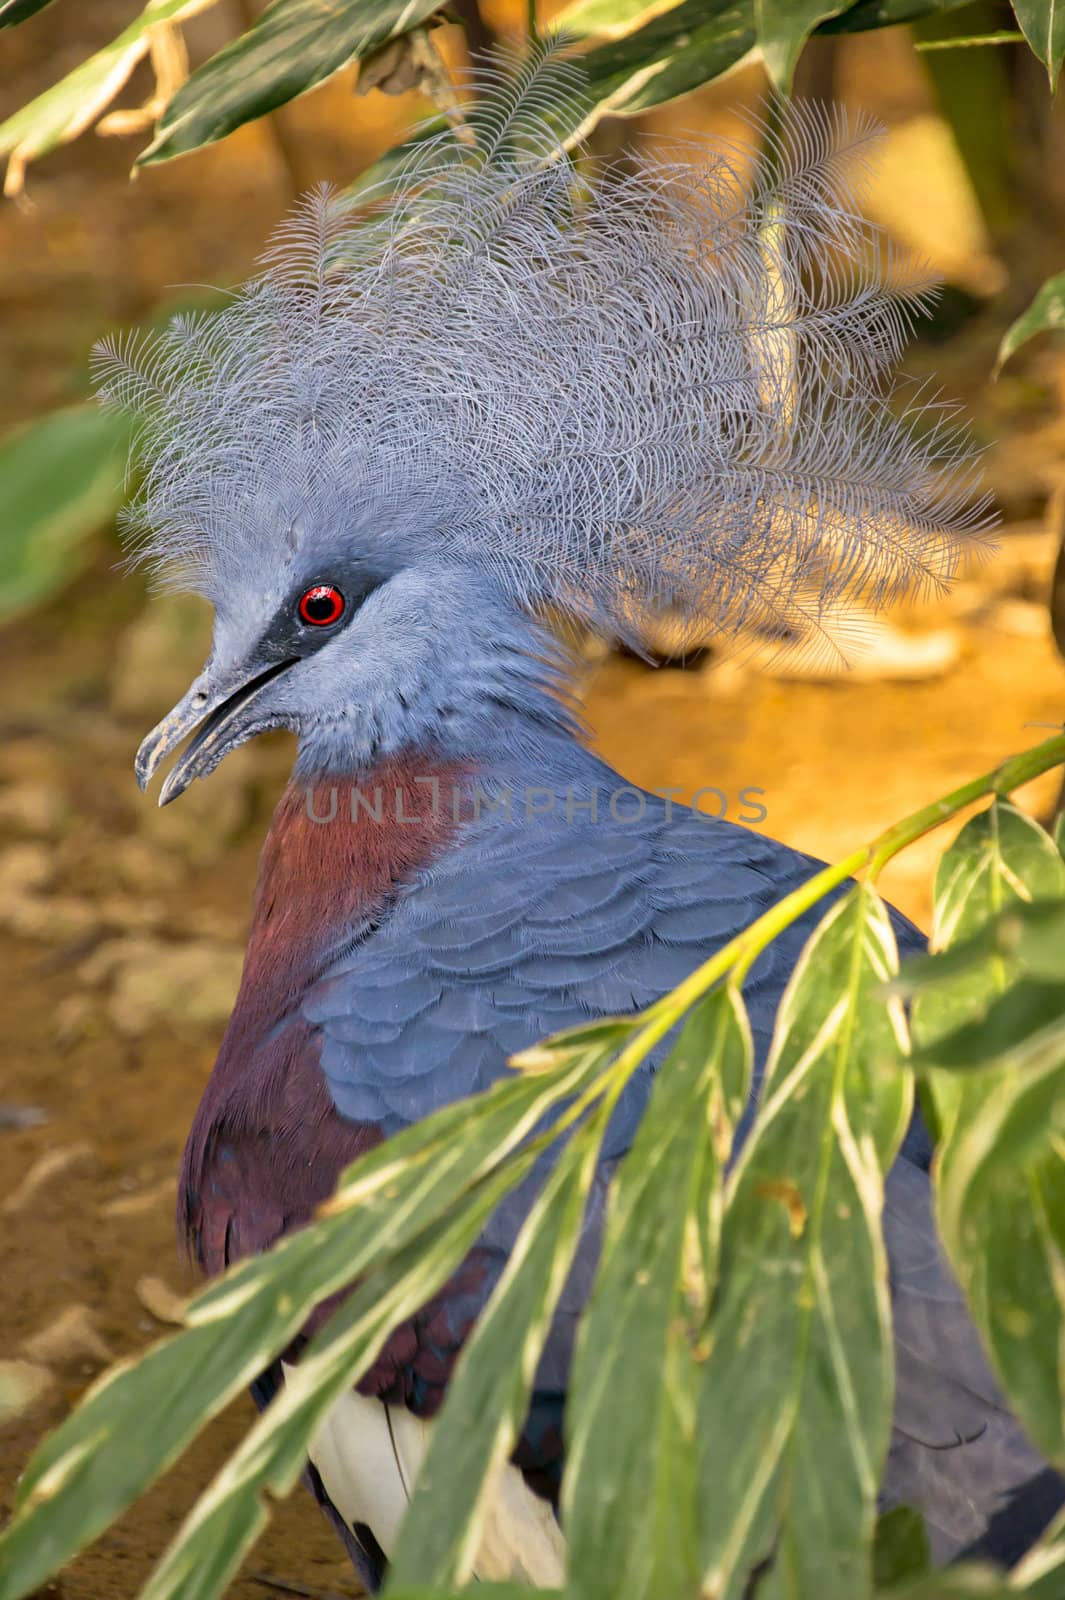 Sheepmaker's Crowned Pigeon with blue plumage, a blue and white crest and a strikingly bright red eye 

